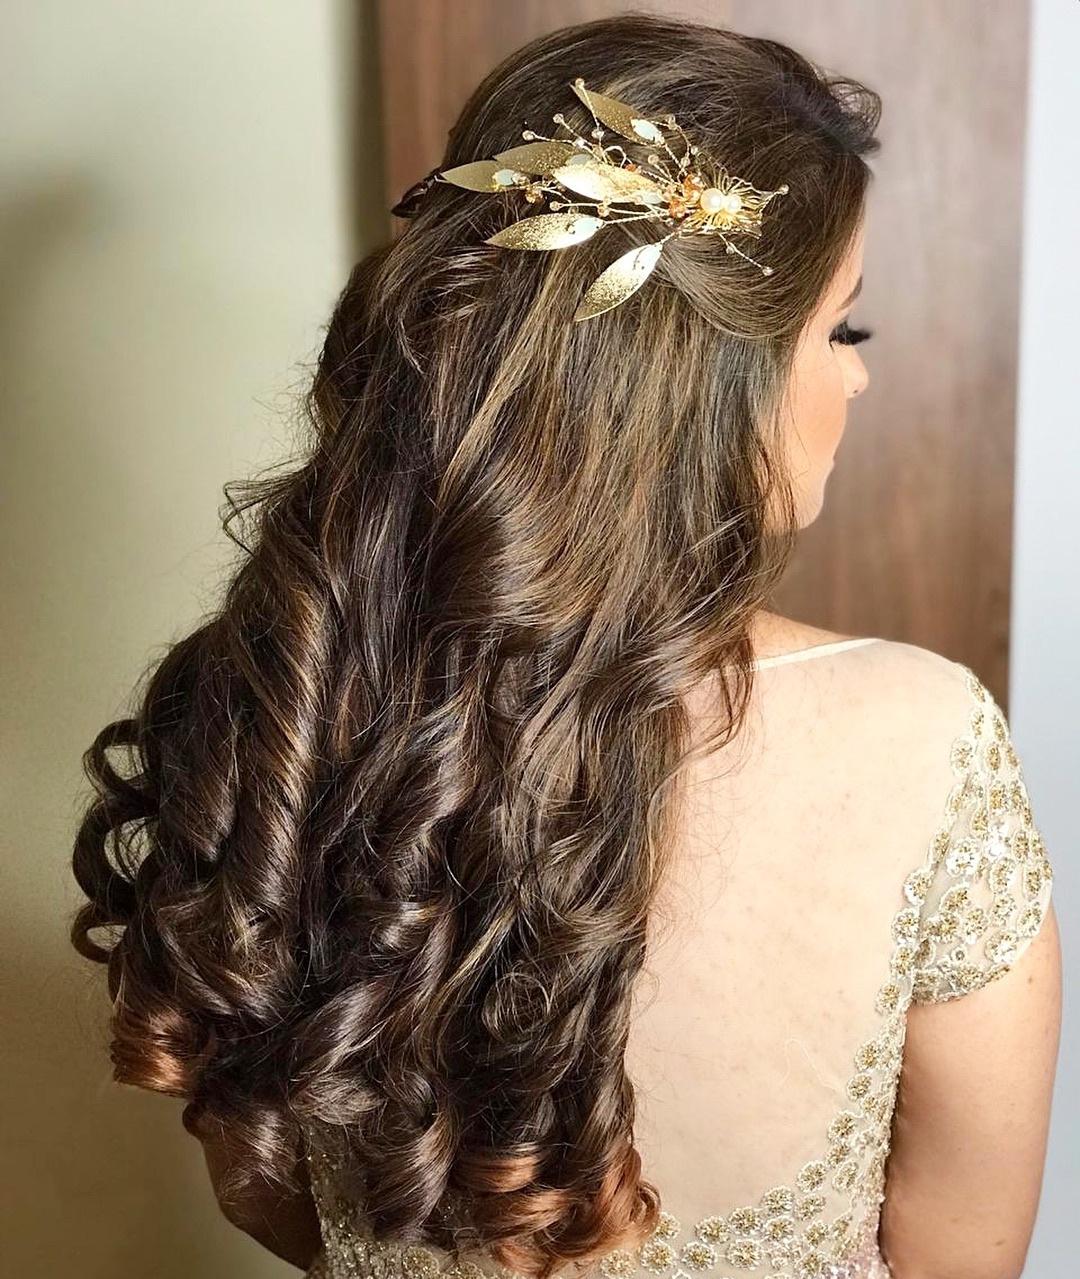 Want To Know About Wedding Hairstyles For Short Hair? Read To Know More  About Wedding Hairstyles For Short Hair | NykaaNetwork